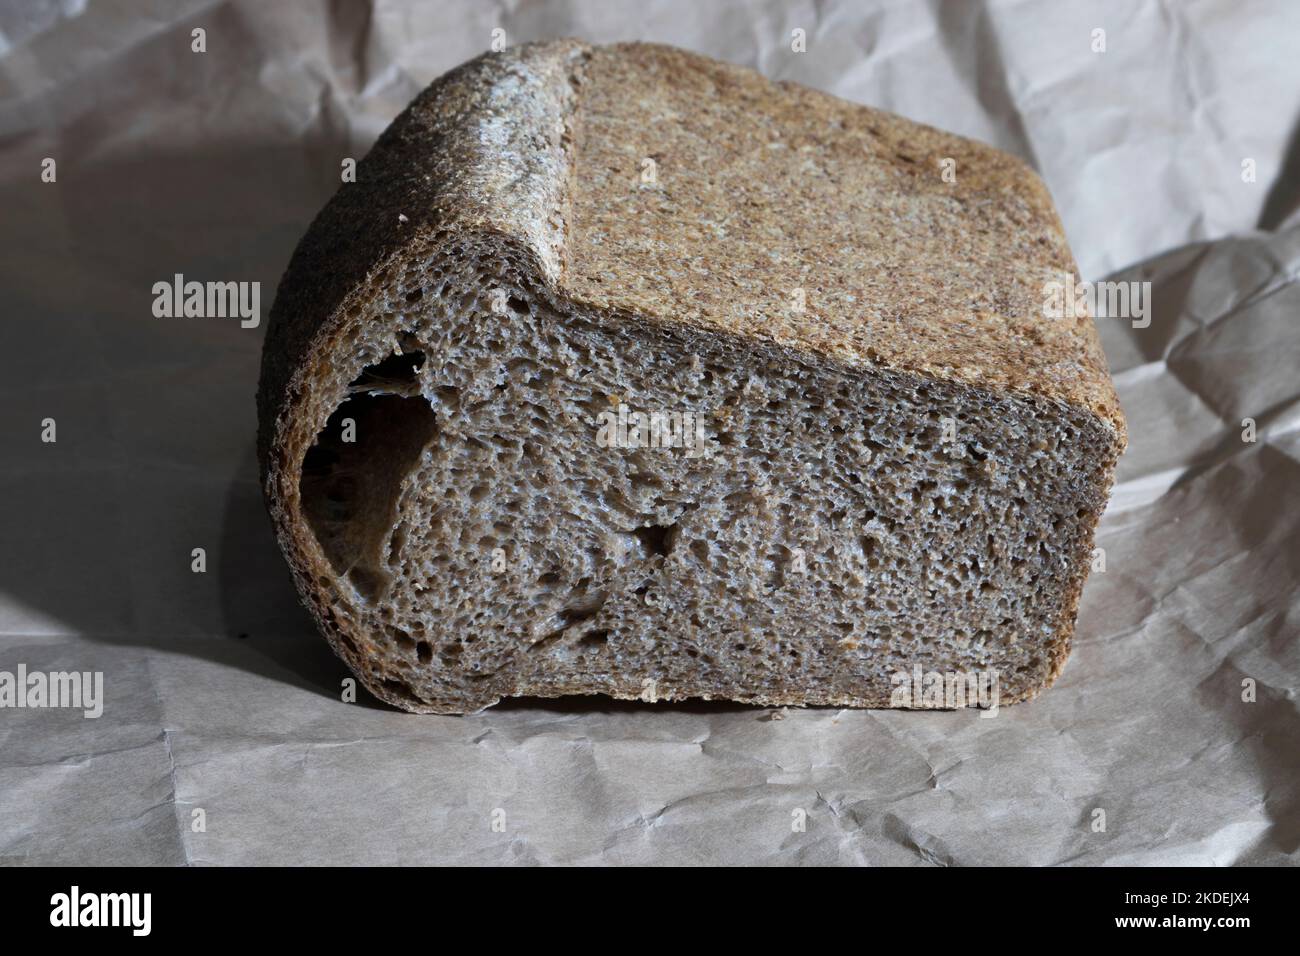 Bread baked from whole grain flour. For its baking, a collectible wheat variety Spelta neglectum was used. It is located on wrapping paper. Close-up. Stock Photo